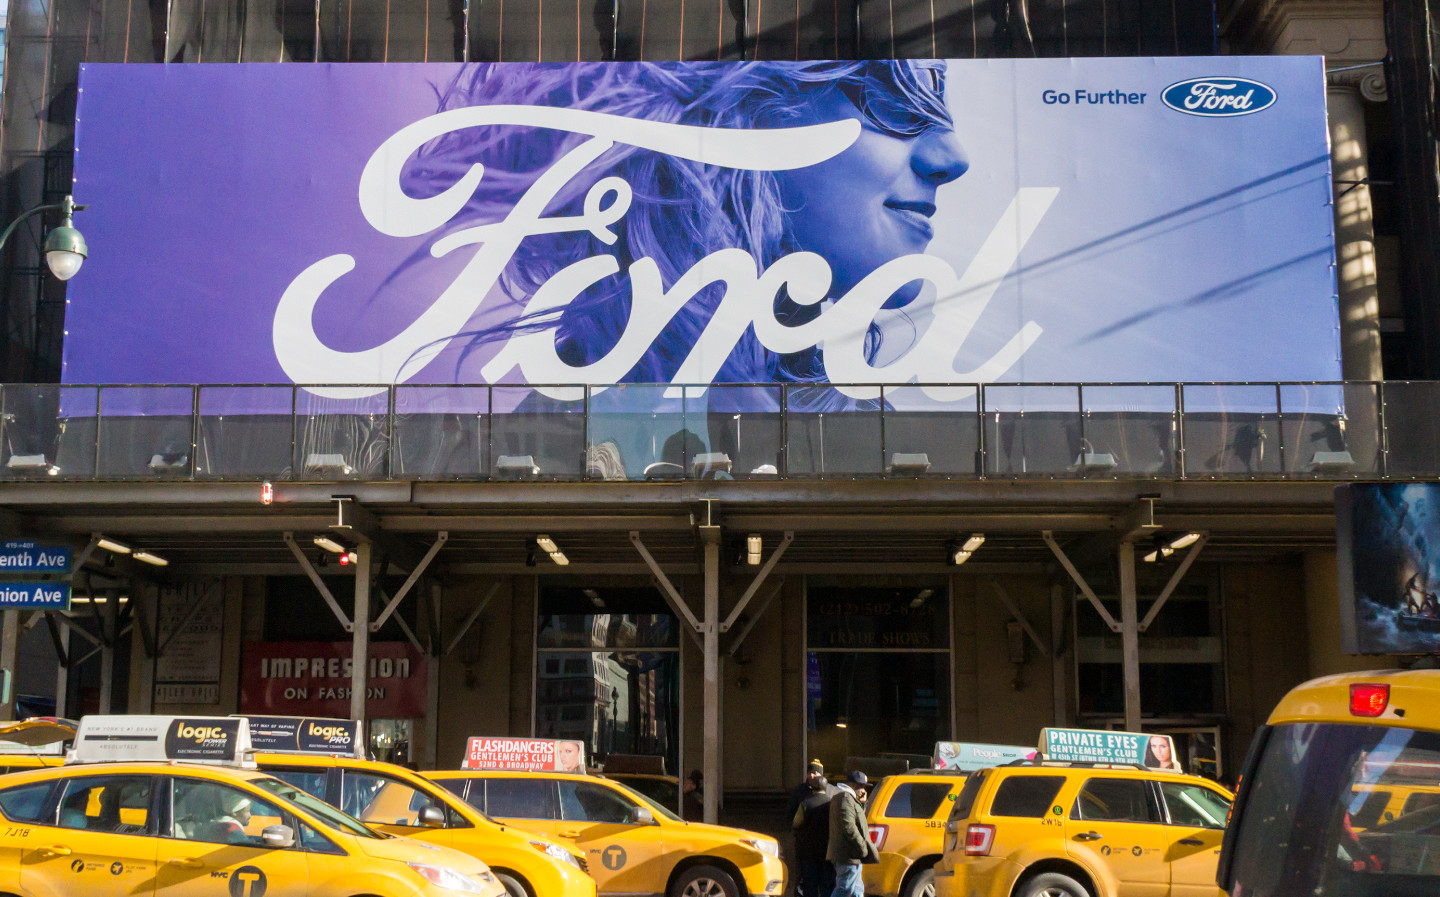 Safety expert questions Ford billboard patent